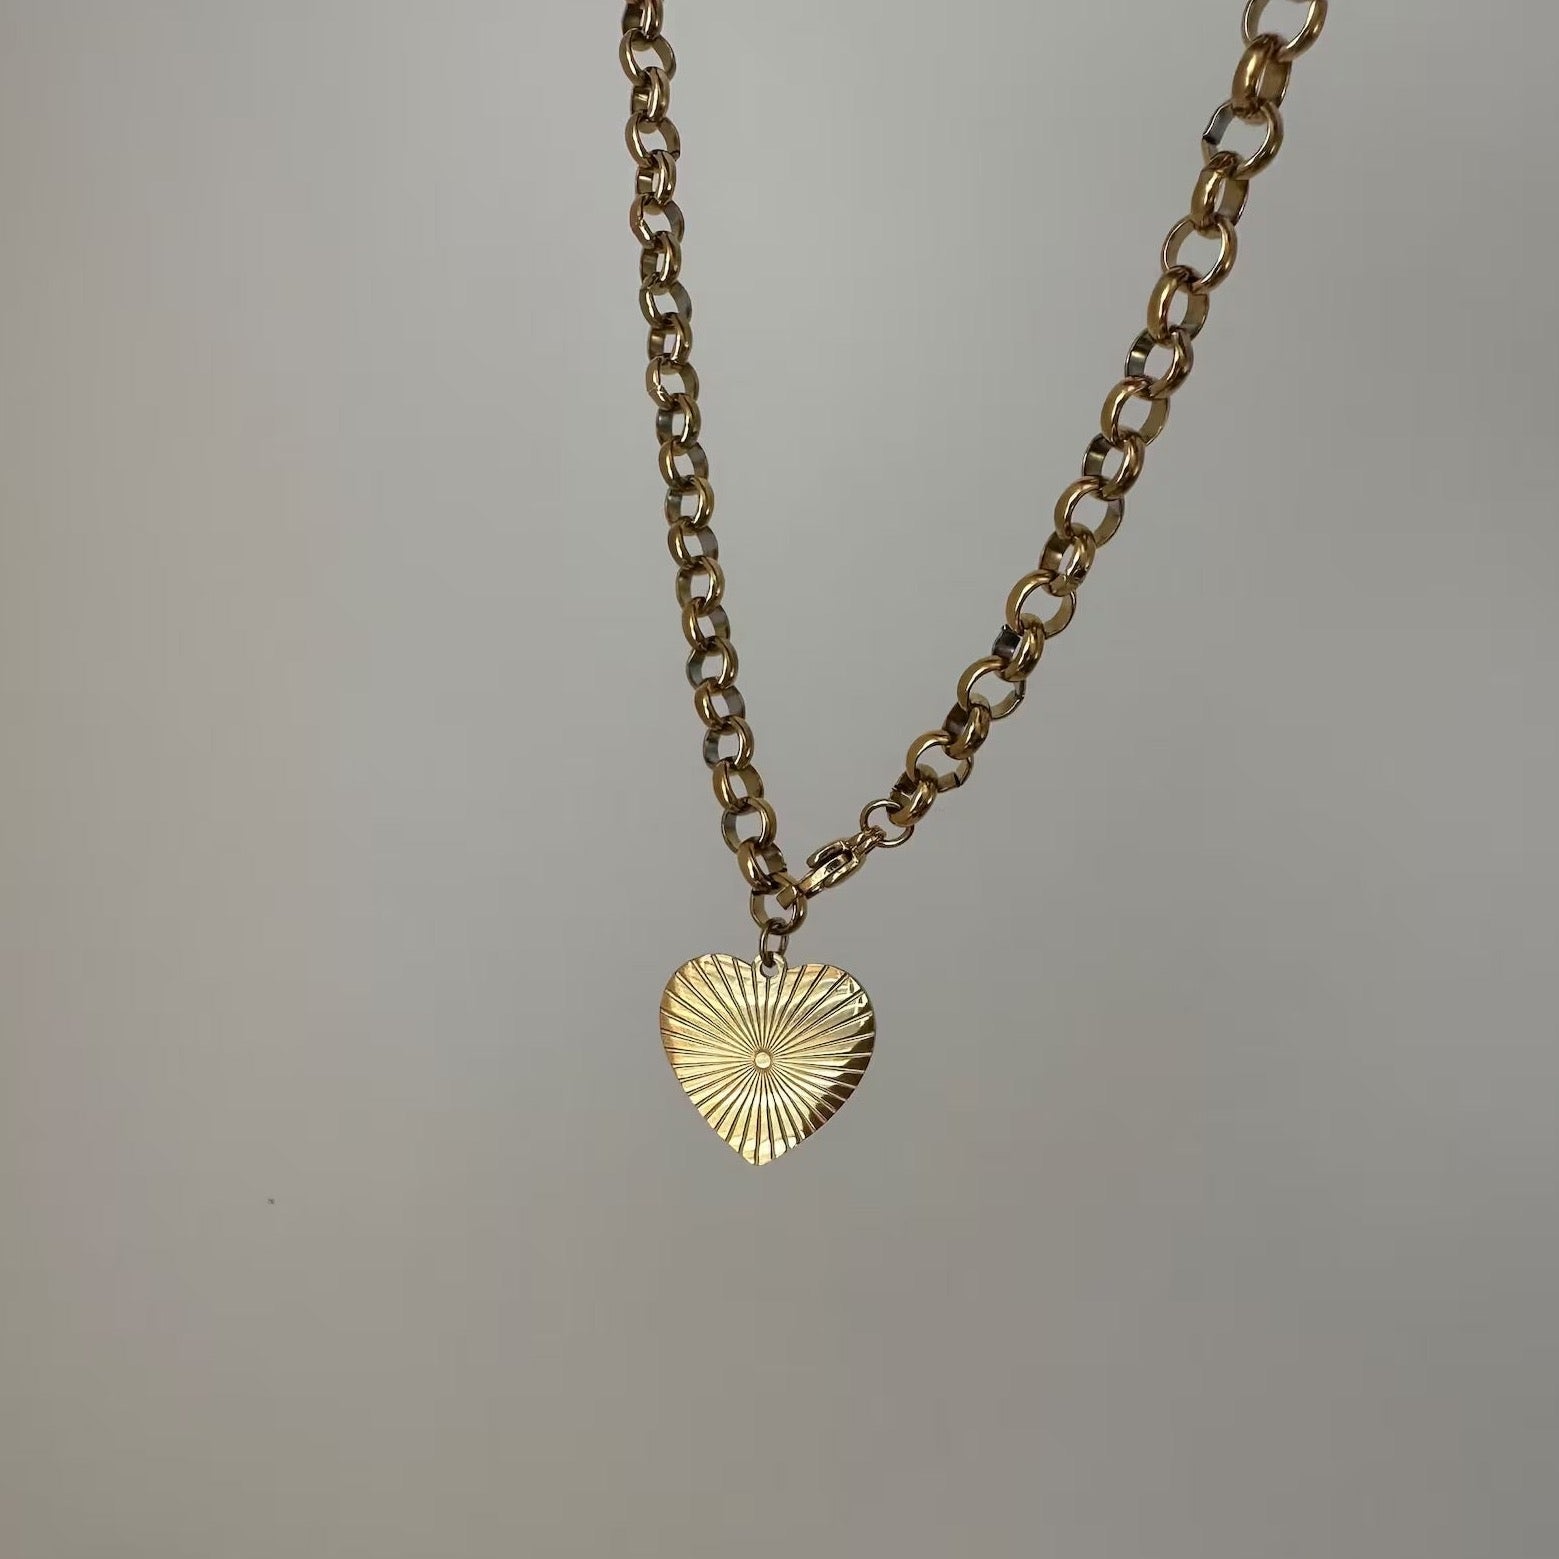 Stylish Heart Pendant Necklace necklace for a stacking necklaces